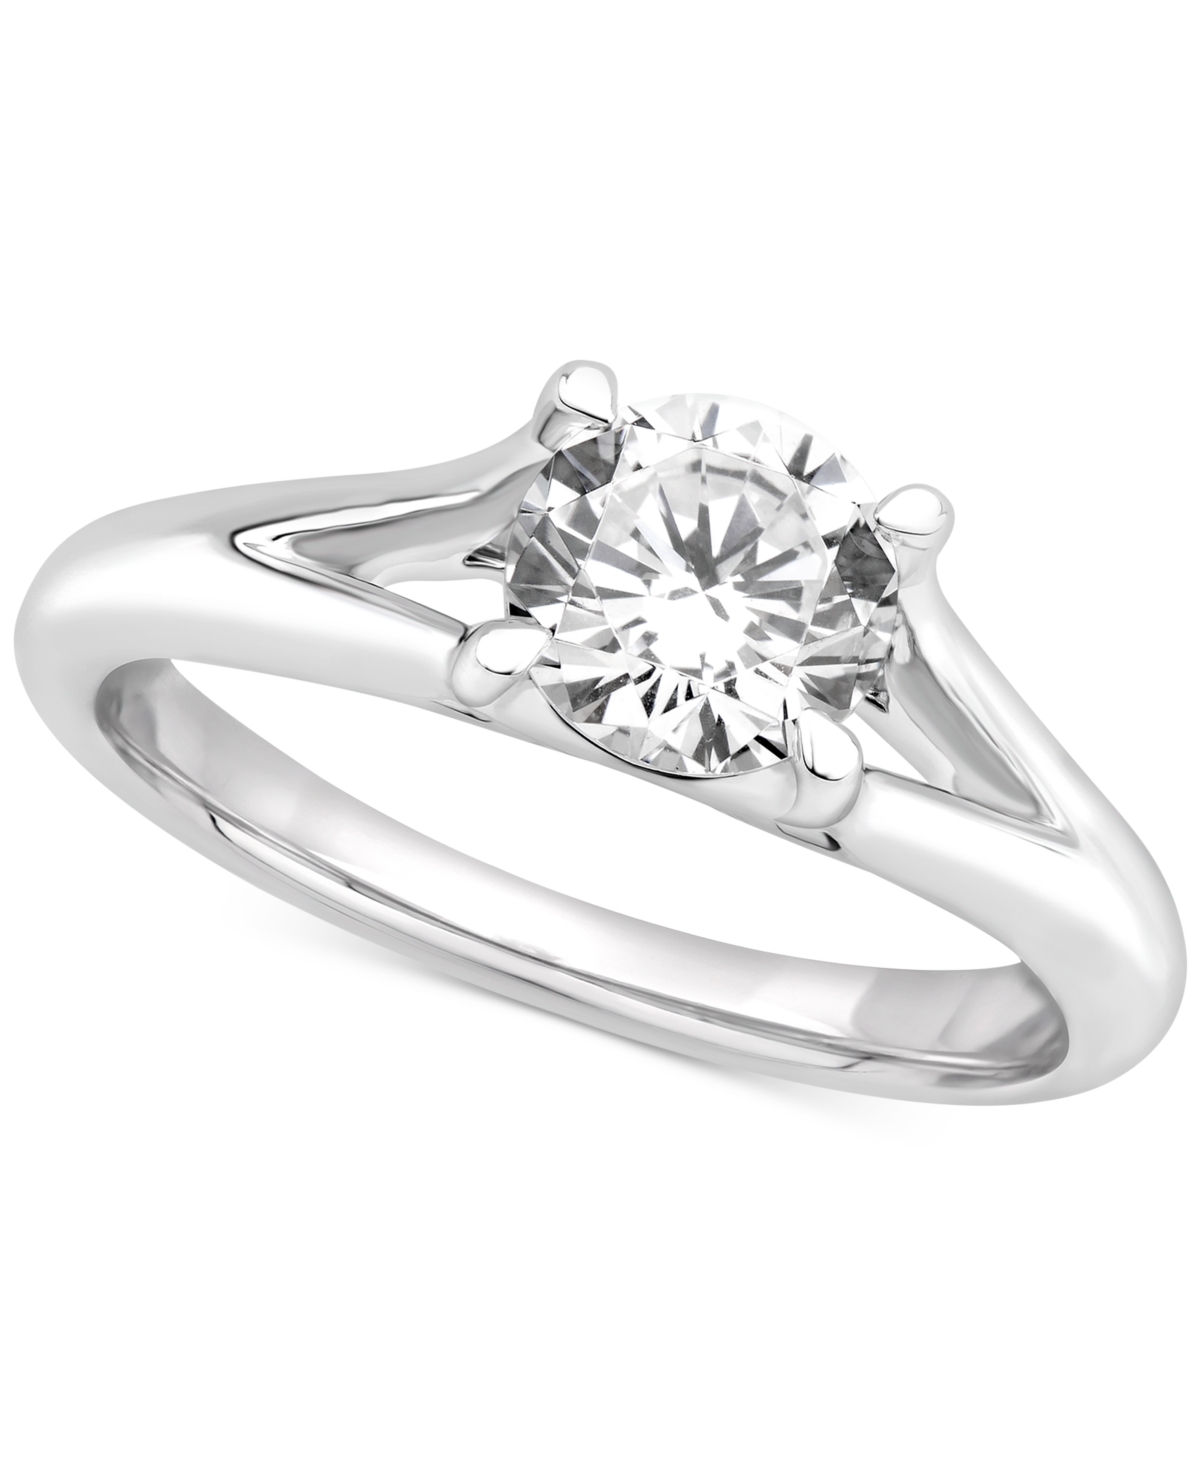 Gia Certified Diamonds Gia Certified Diamond Solitaire Engagement Ring (1 ct. t.w.) in 14k White Gold